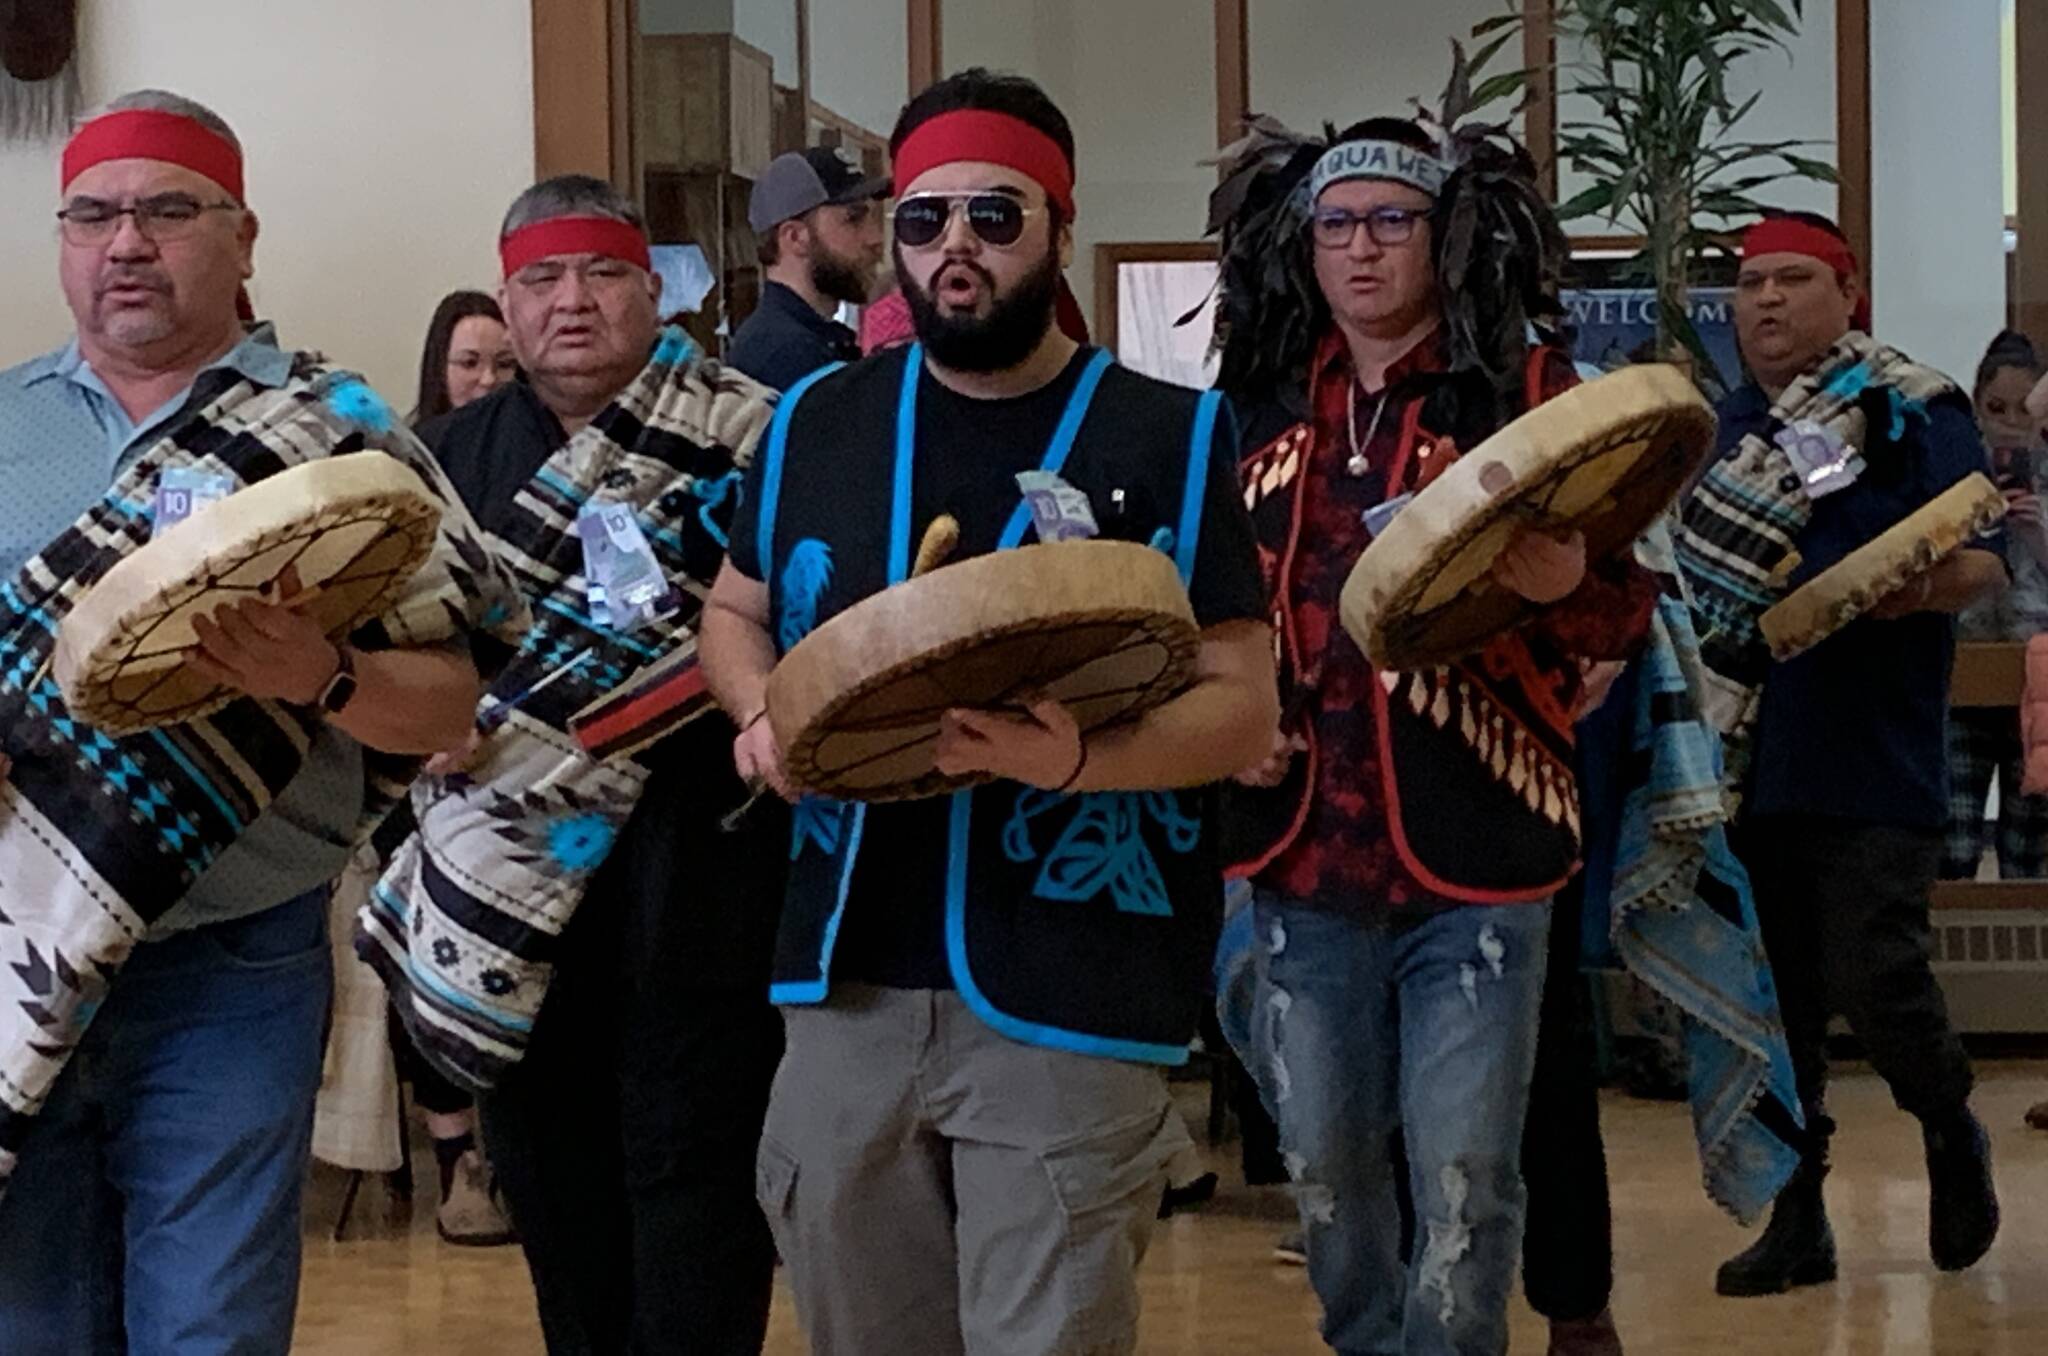 Drummers sing as they walk into the Sts’ailes Lhawathet Lalem (Healing House) on Friday, March 3. (Adam Louis/Observer)